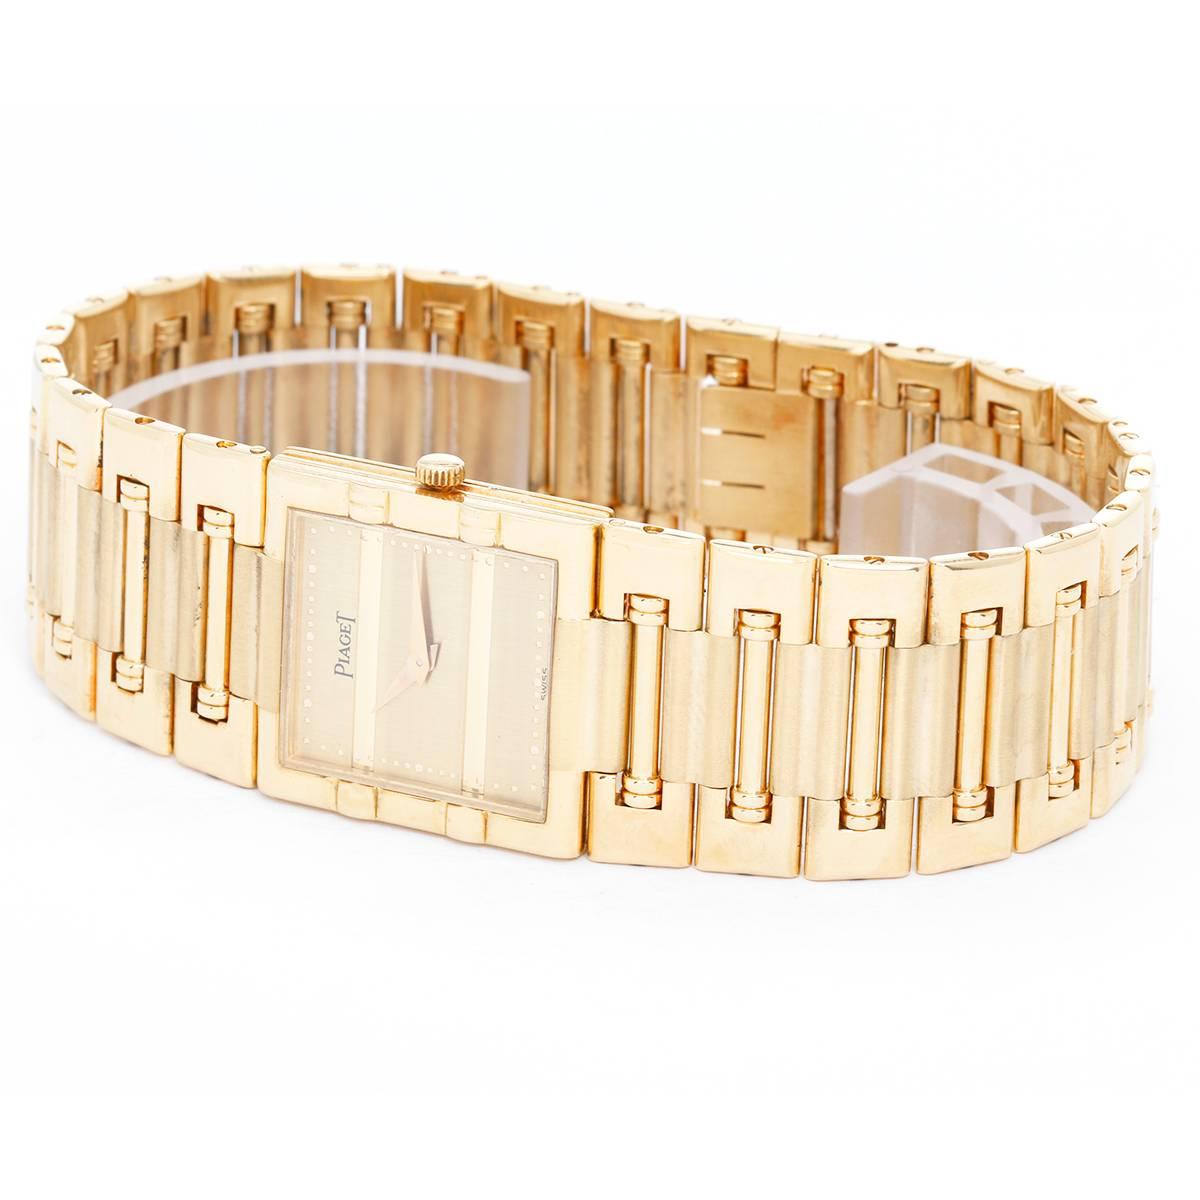 Piaget 18K Yellow Gold Dancer Men's Watch Ref. 80317 K81 -  Quartz. 18K Yellow Gold ( 23 mm ). Brushed champagne dial with dot minute divisions and gold hands. 18K link bracelet. Pre-owned with box. Will fit a 7-inch wrist